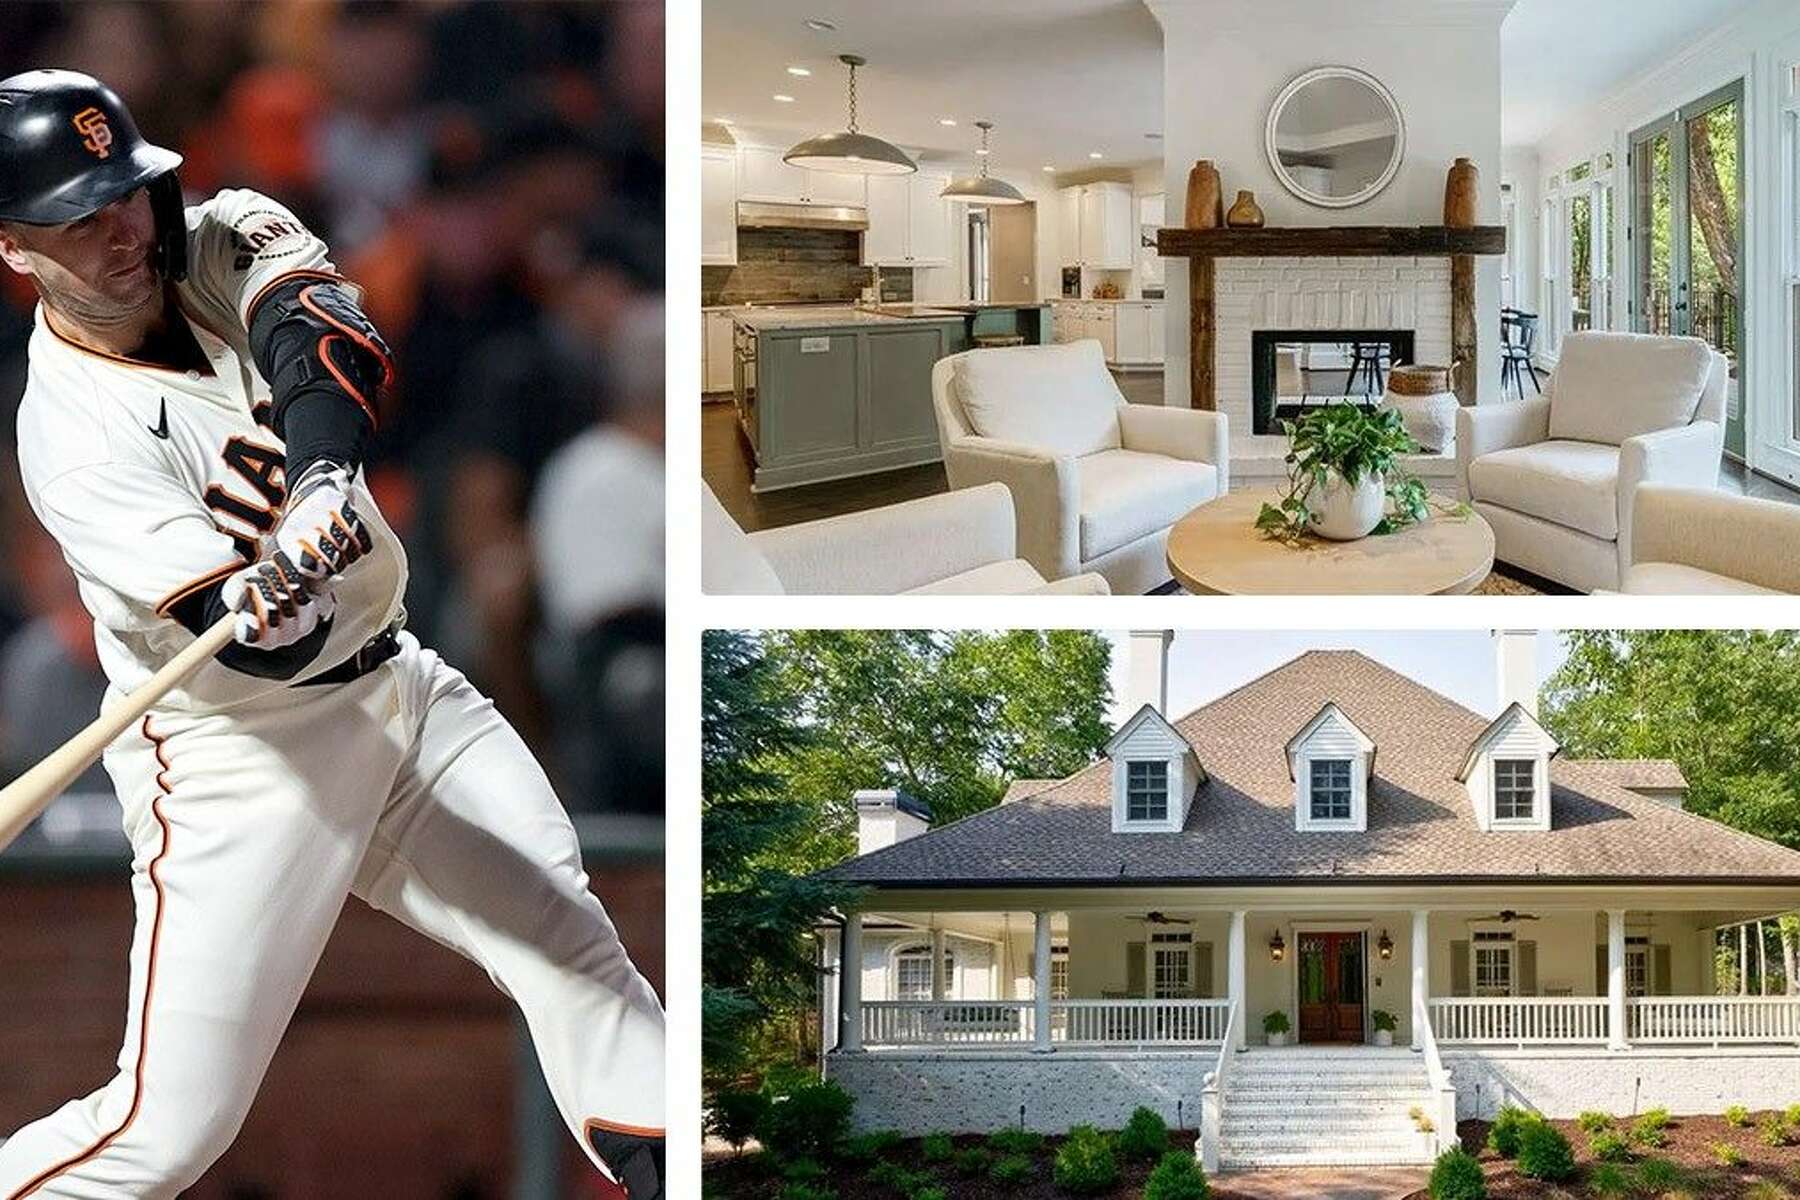 San Francisco Giants legend Buster Posey lists his 106-acre California  hunting 'paradise' for $3.9 million